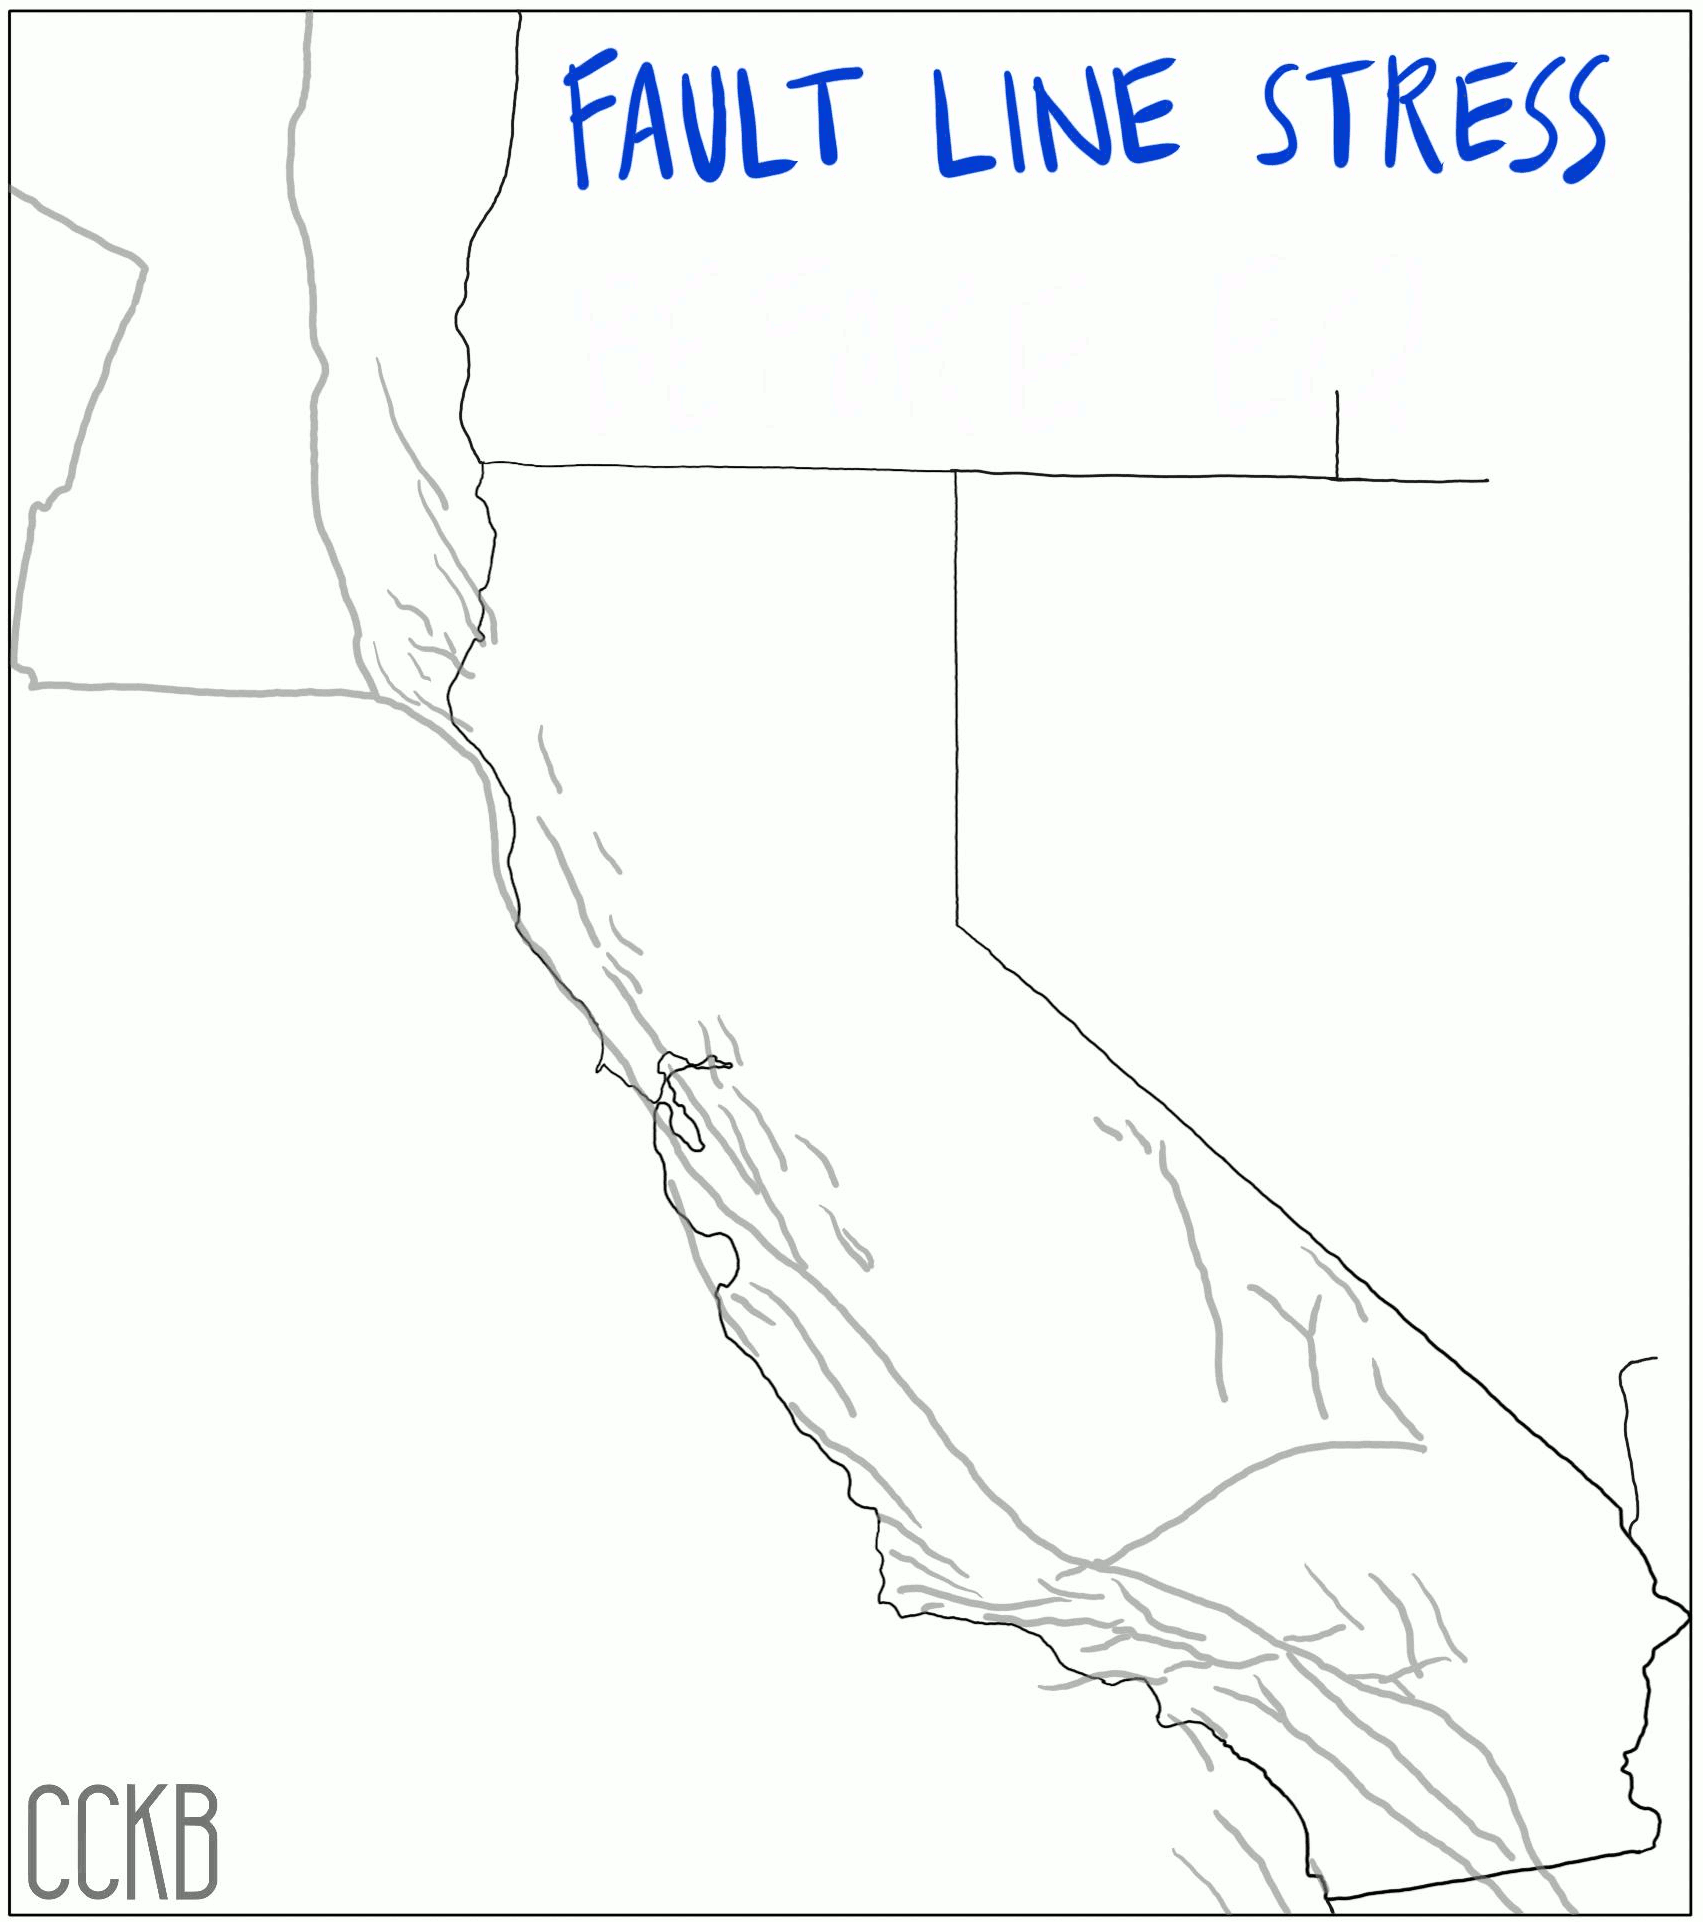 animated gif showing fault line stress before and after earthquake